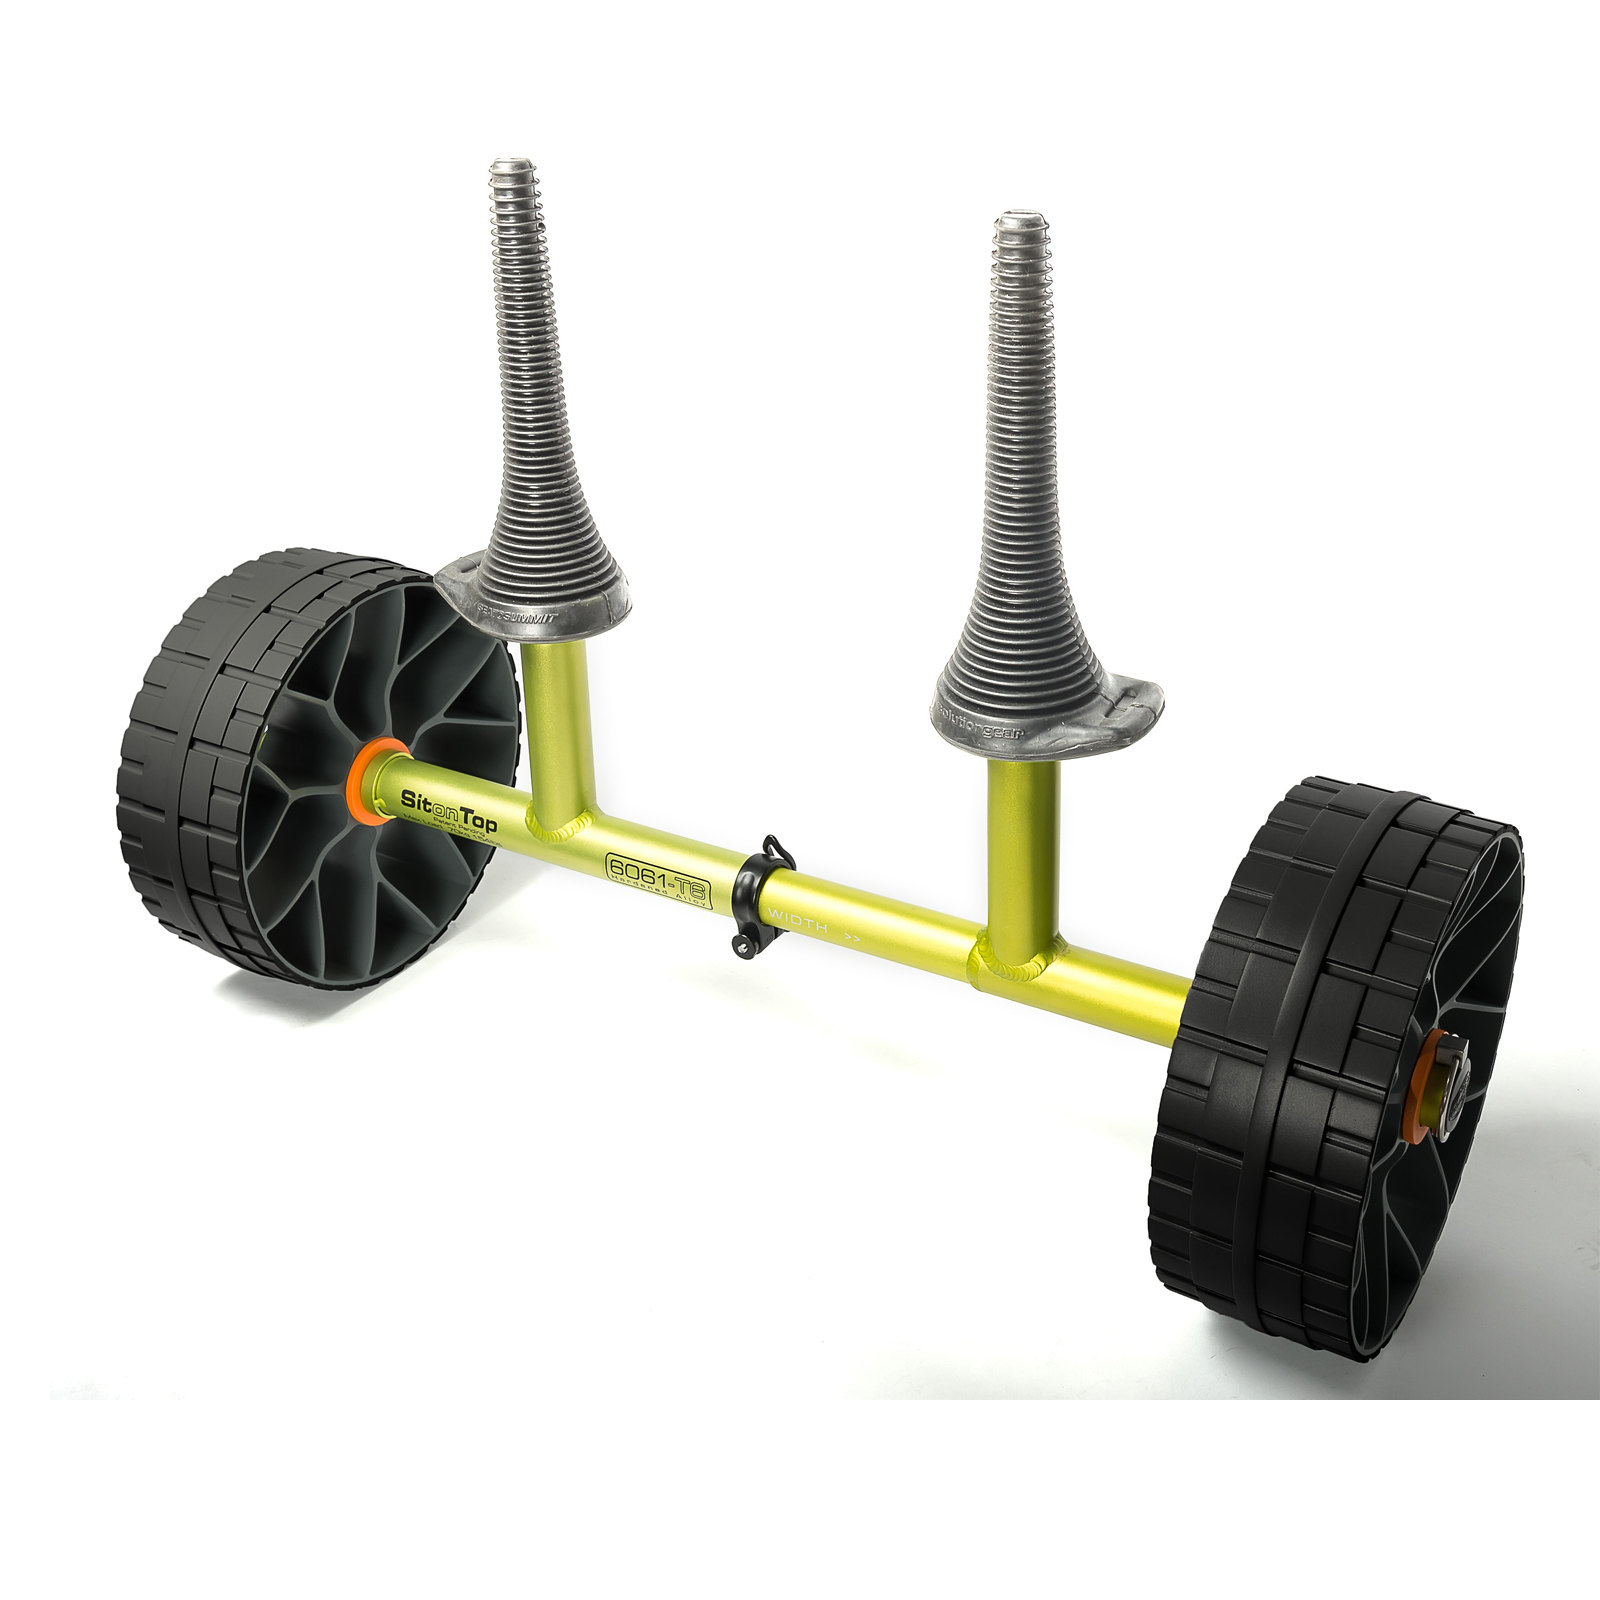 S2S Sit-on-Top Cart - solid wheels